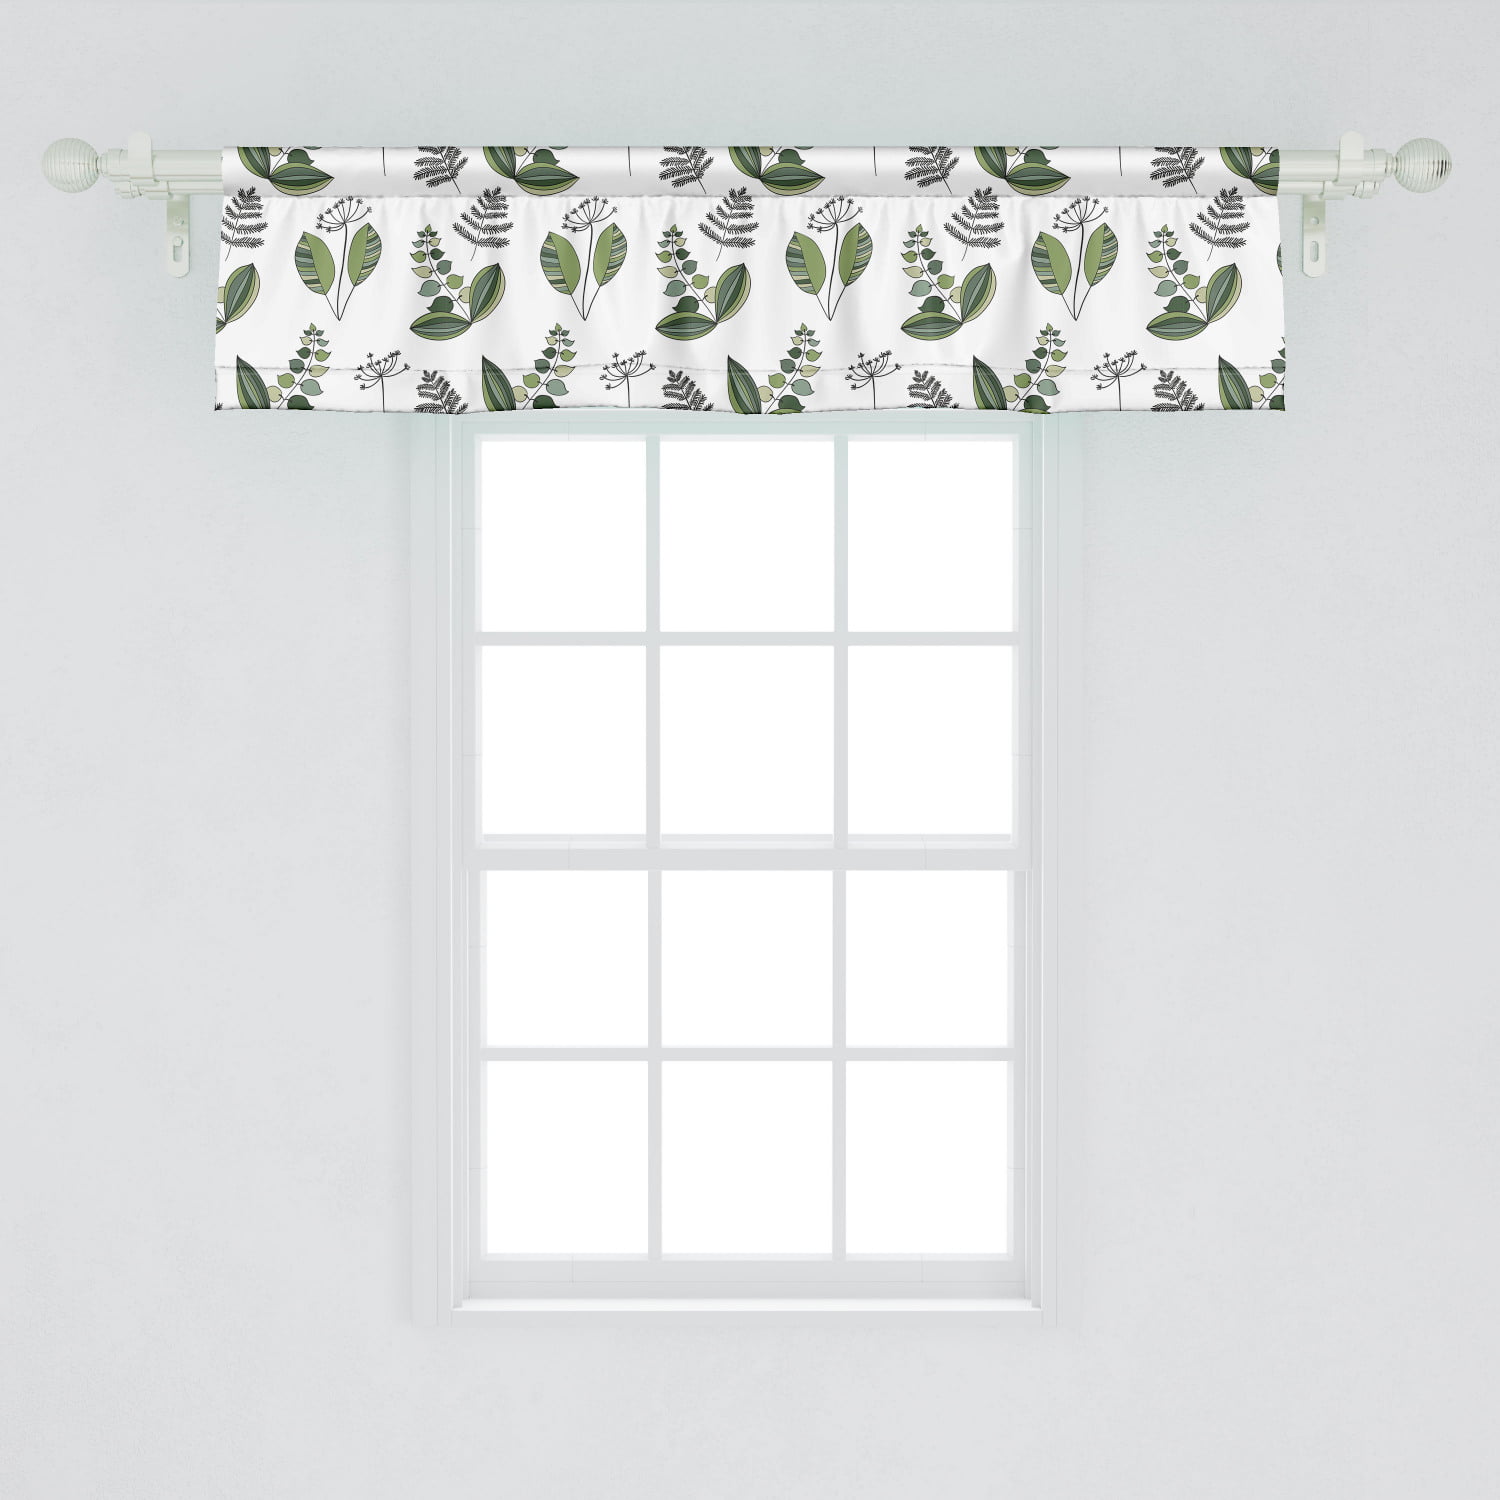 Ambesonne Monstera Window Valance, Tropical Jungle Foliage Hawaiian Nature  Growth Sketchy Leaves Environment Eco, Curtain Valance for Kitchen Bedroom  ...